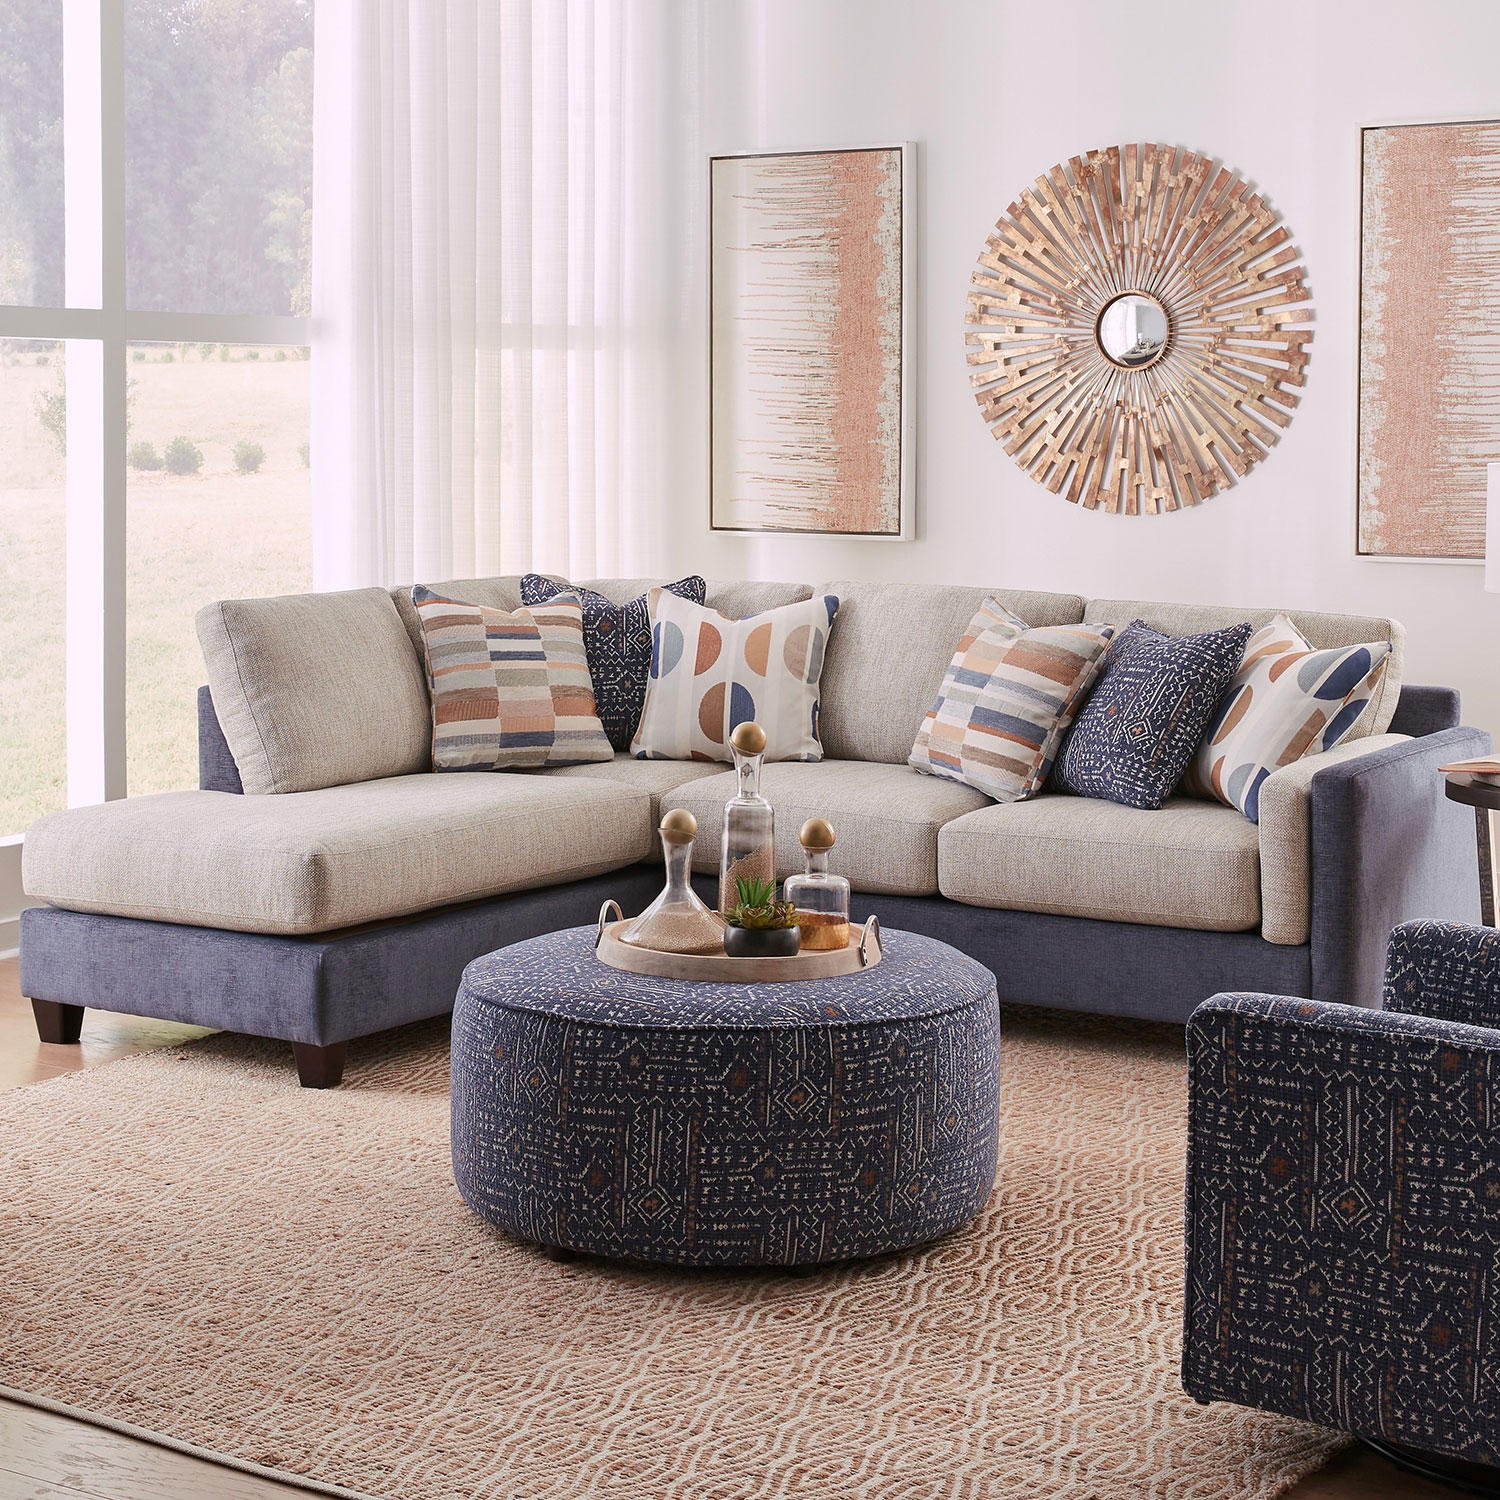 Hollywood Denim Loveseat - Home Zone Furniture - Furniture Stores serving  Dallas, Fort Worth and Northeast Texas | Mattress Sets, Living Room  Furniture, Bedroom Furniture